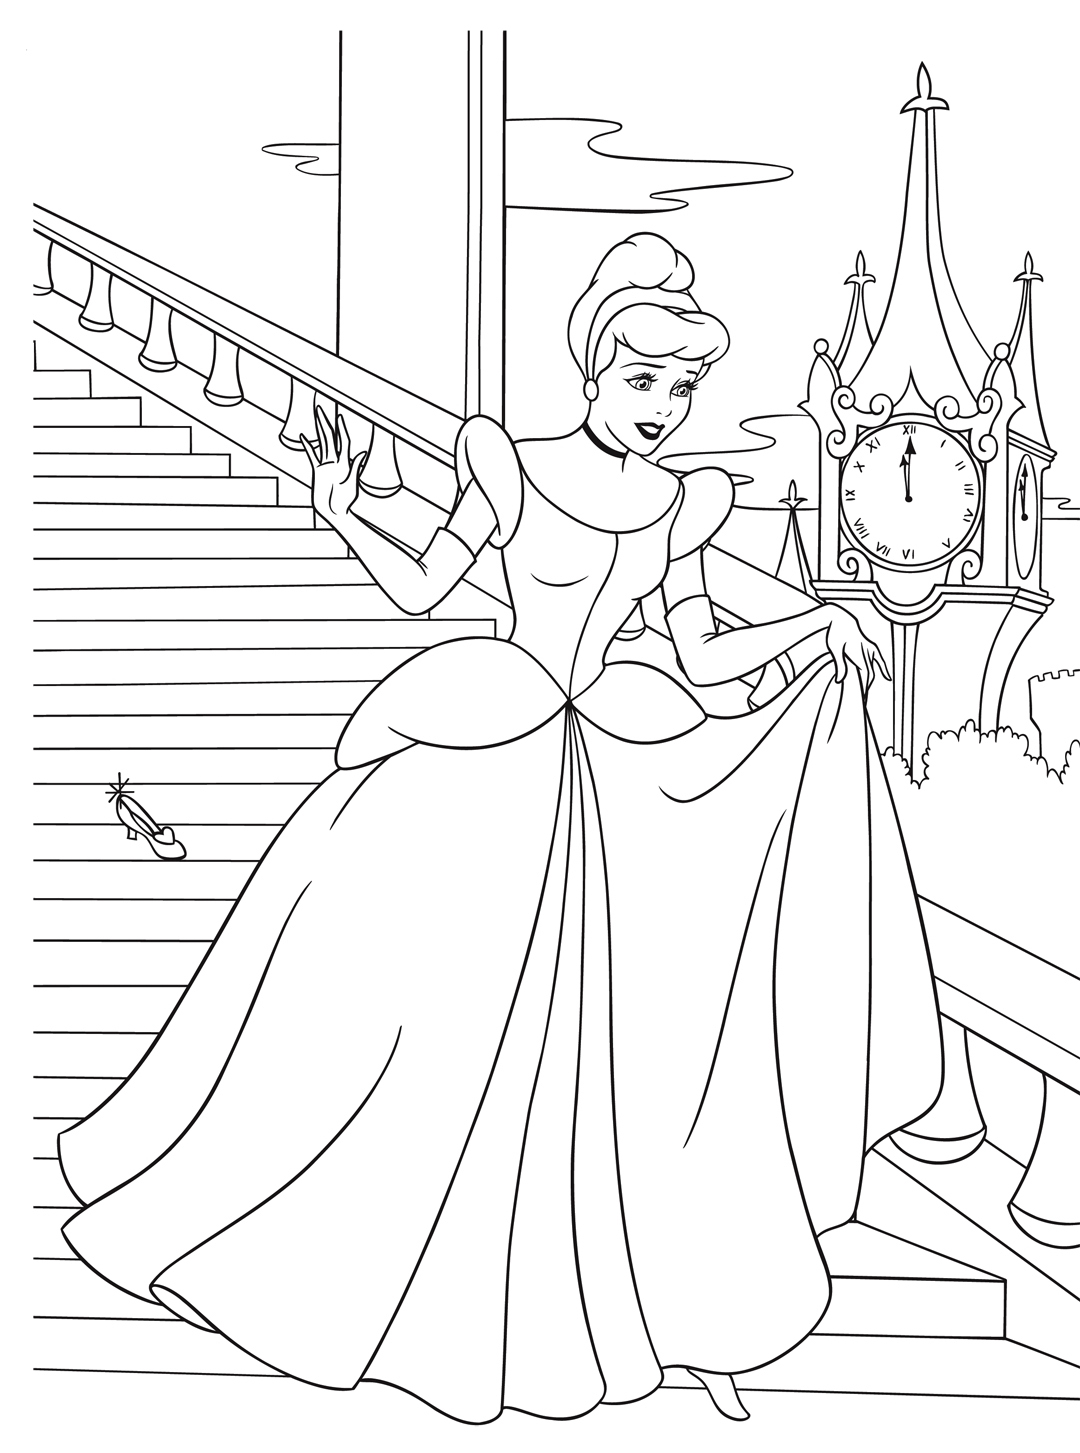 Cinderella coloring pages to download and print for free